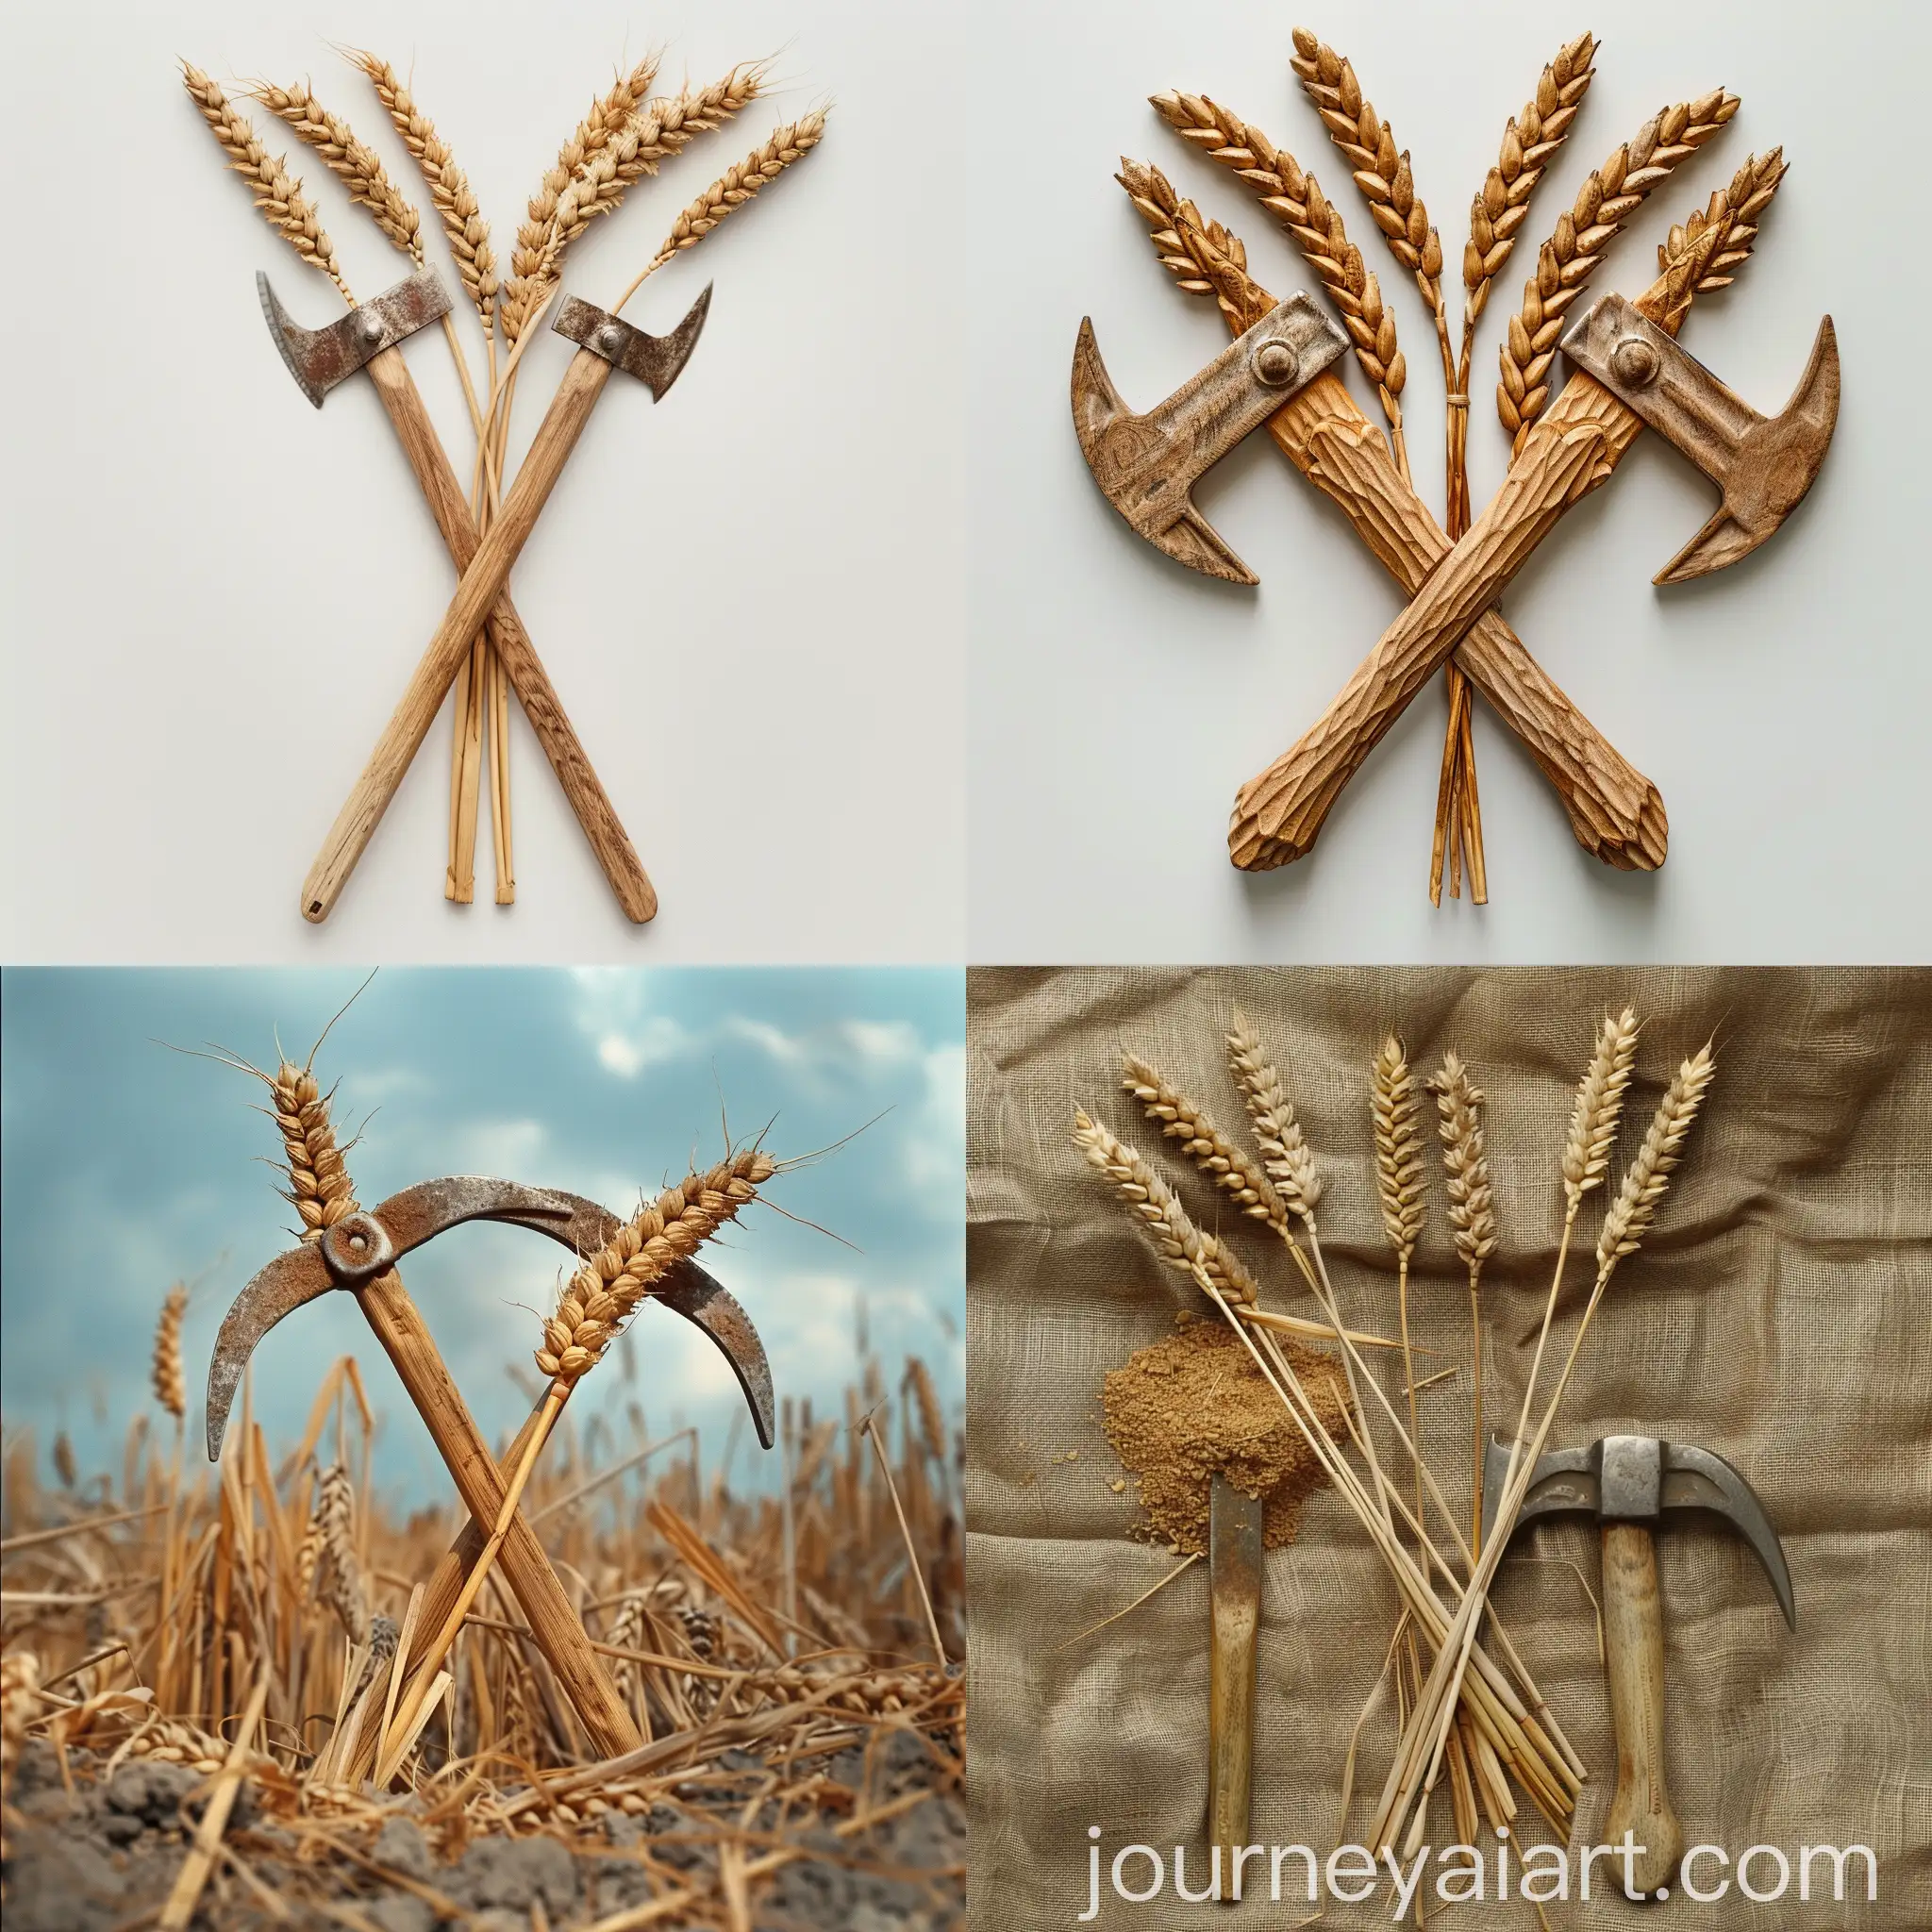 Crossed-Wheat-Ears-and-Pickaxes